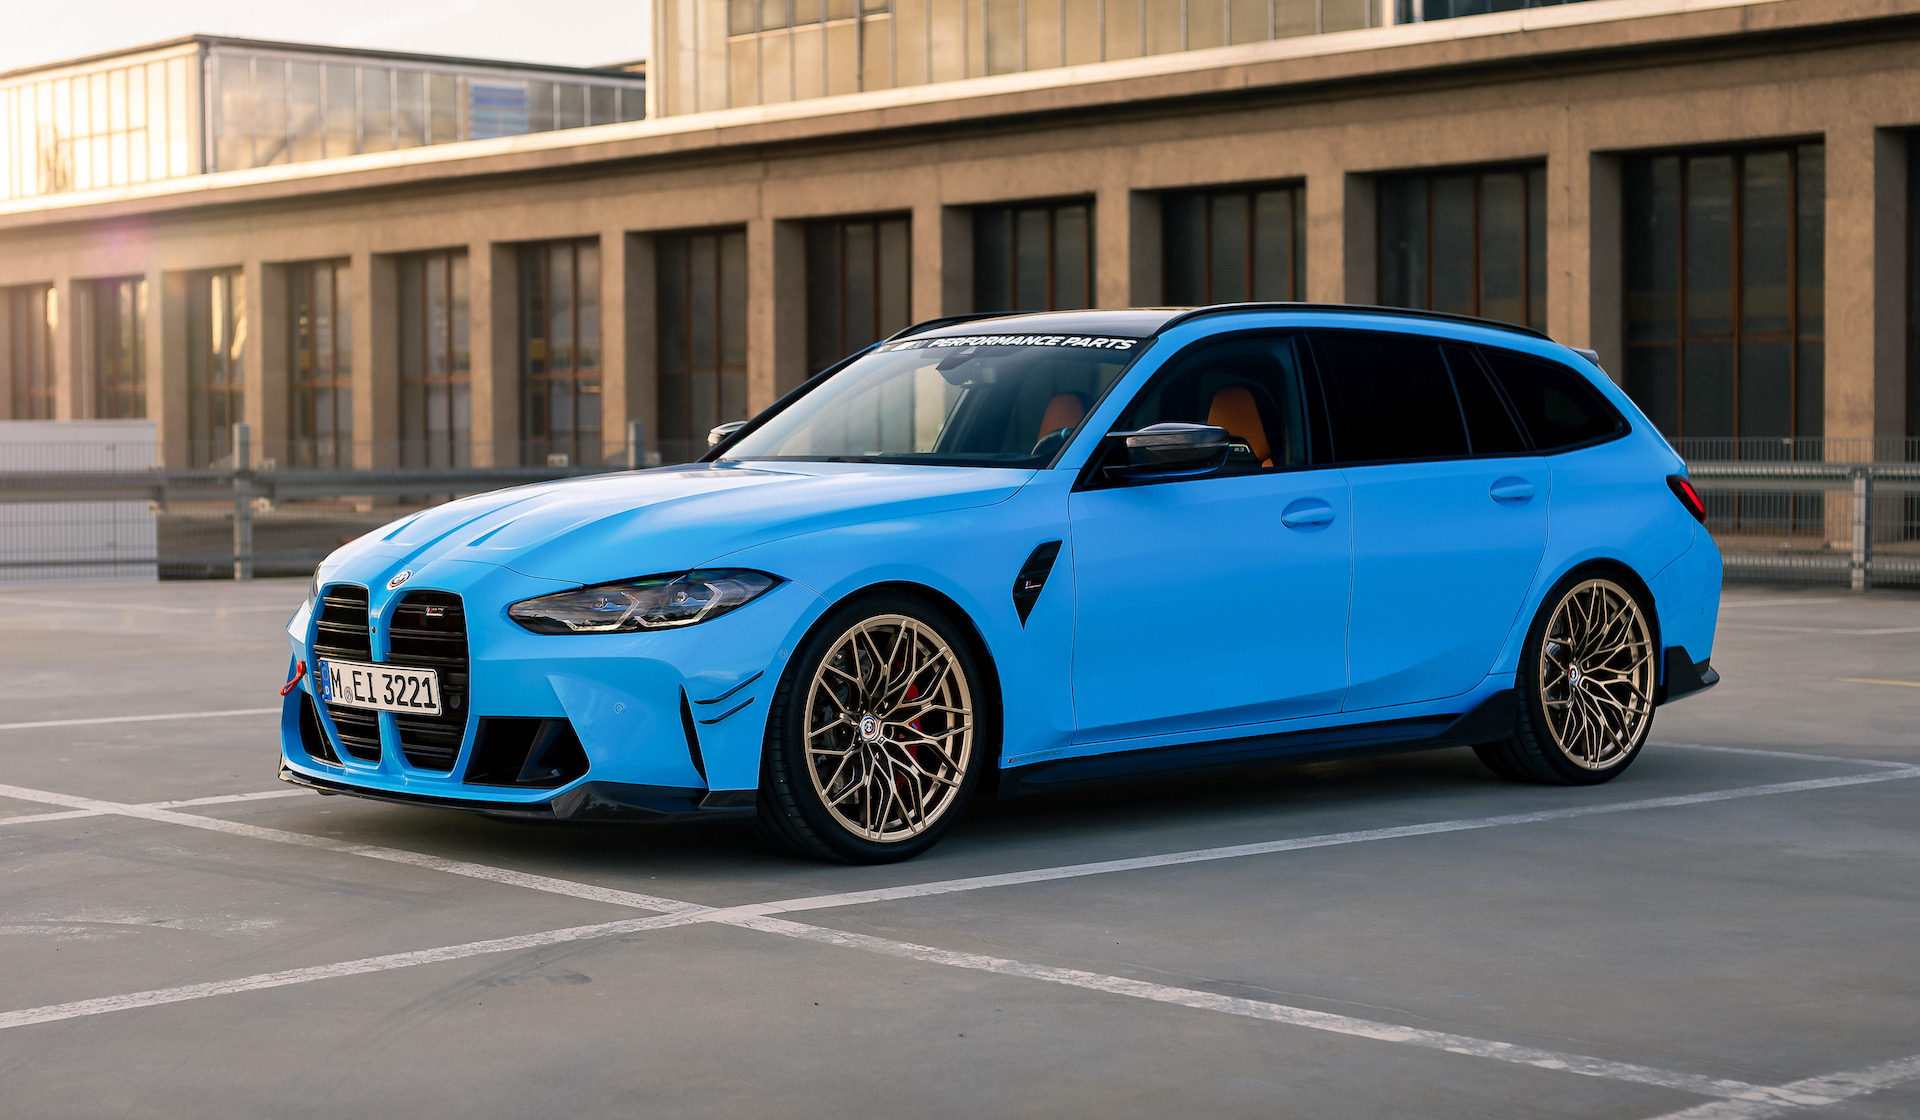 New BMW M2 with full M Performance parts debuts at 2022 Essen